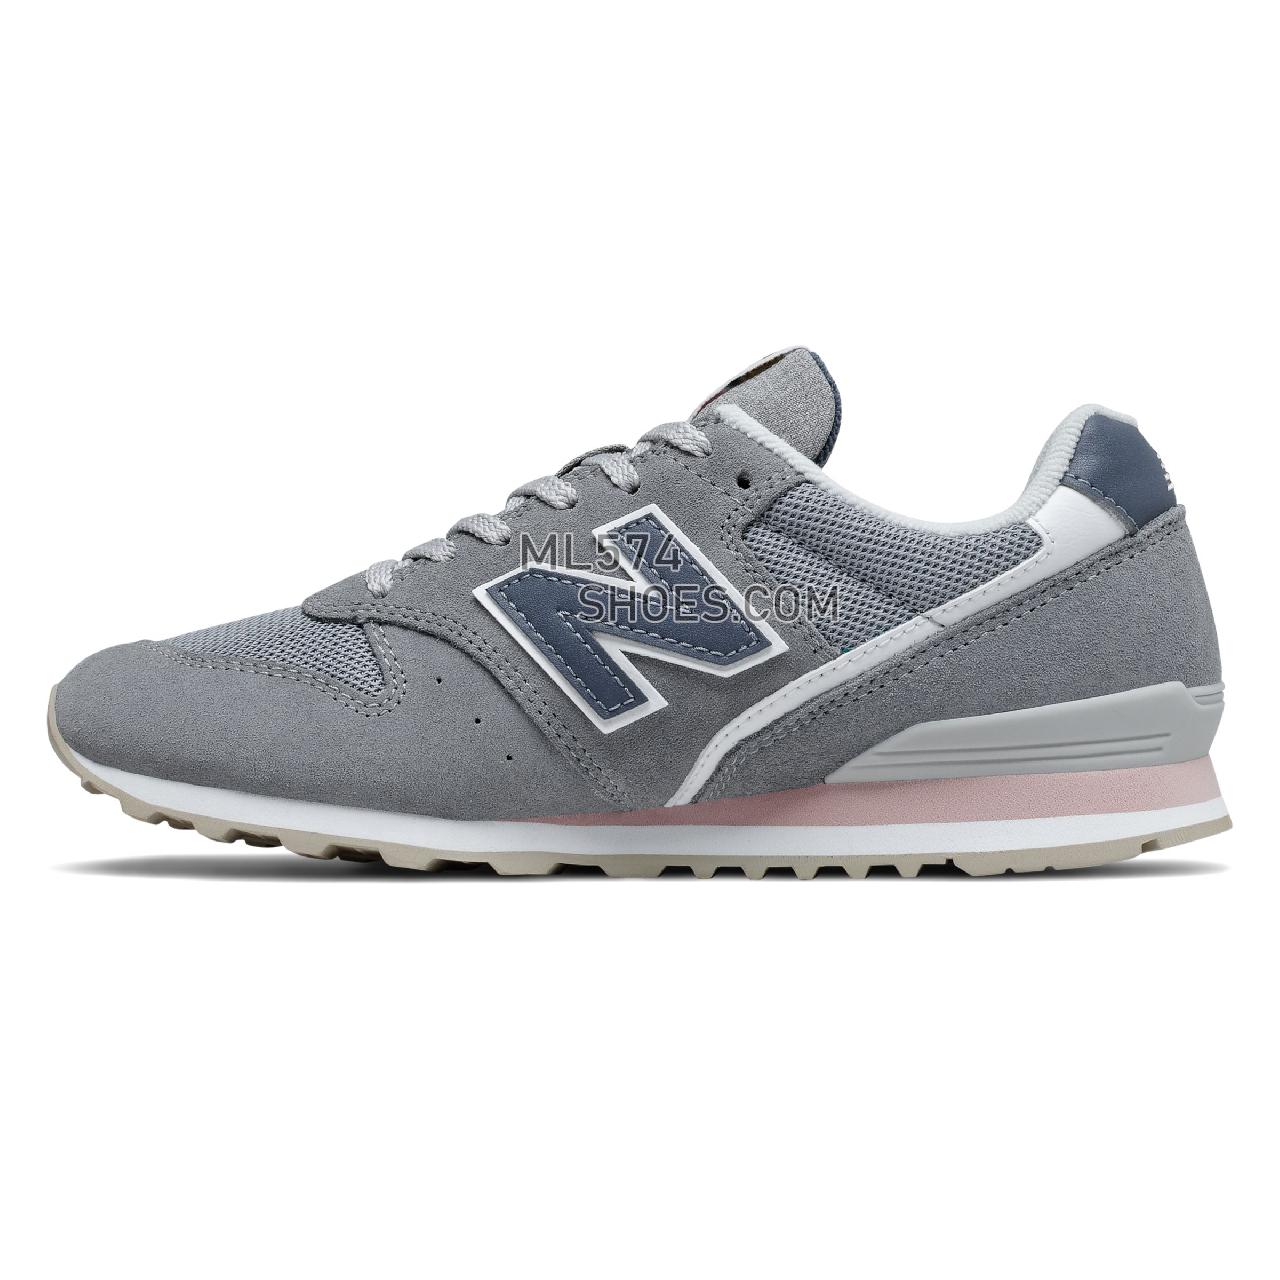 New Balance WL996v2 - Women's Classic Sneakers - Gunmetal with Saturn Pink - WL996WS